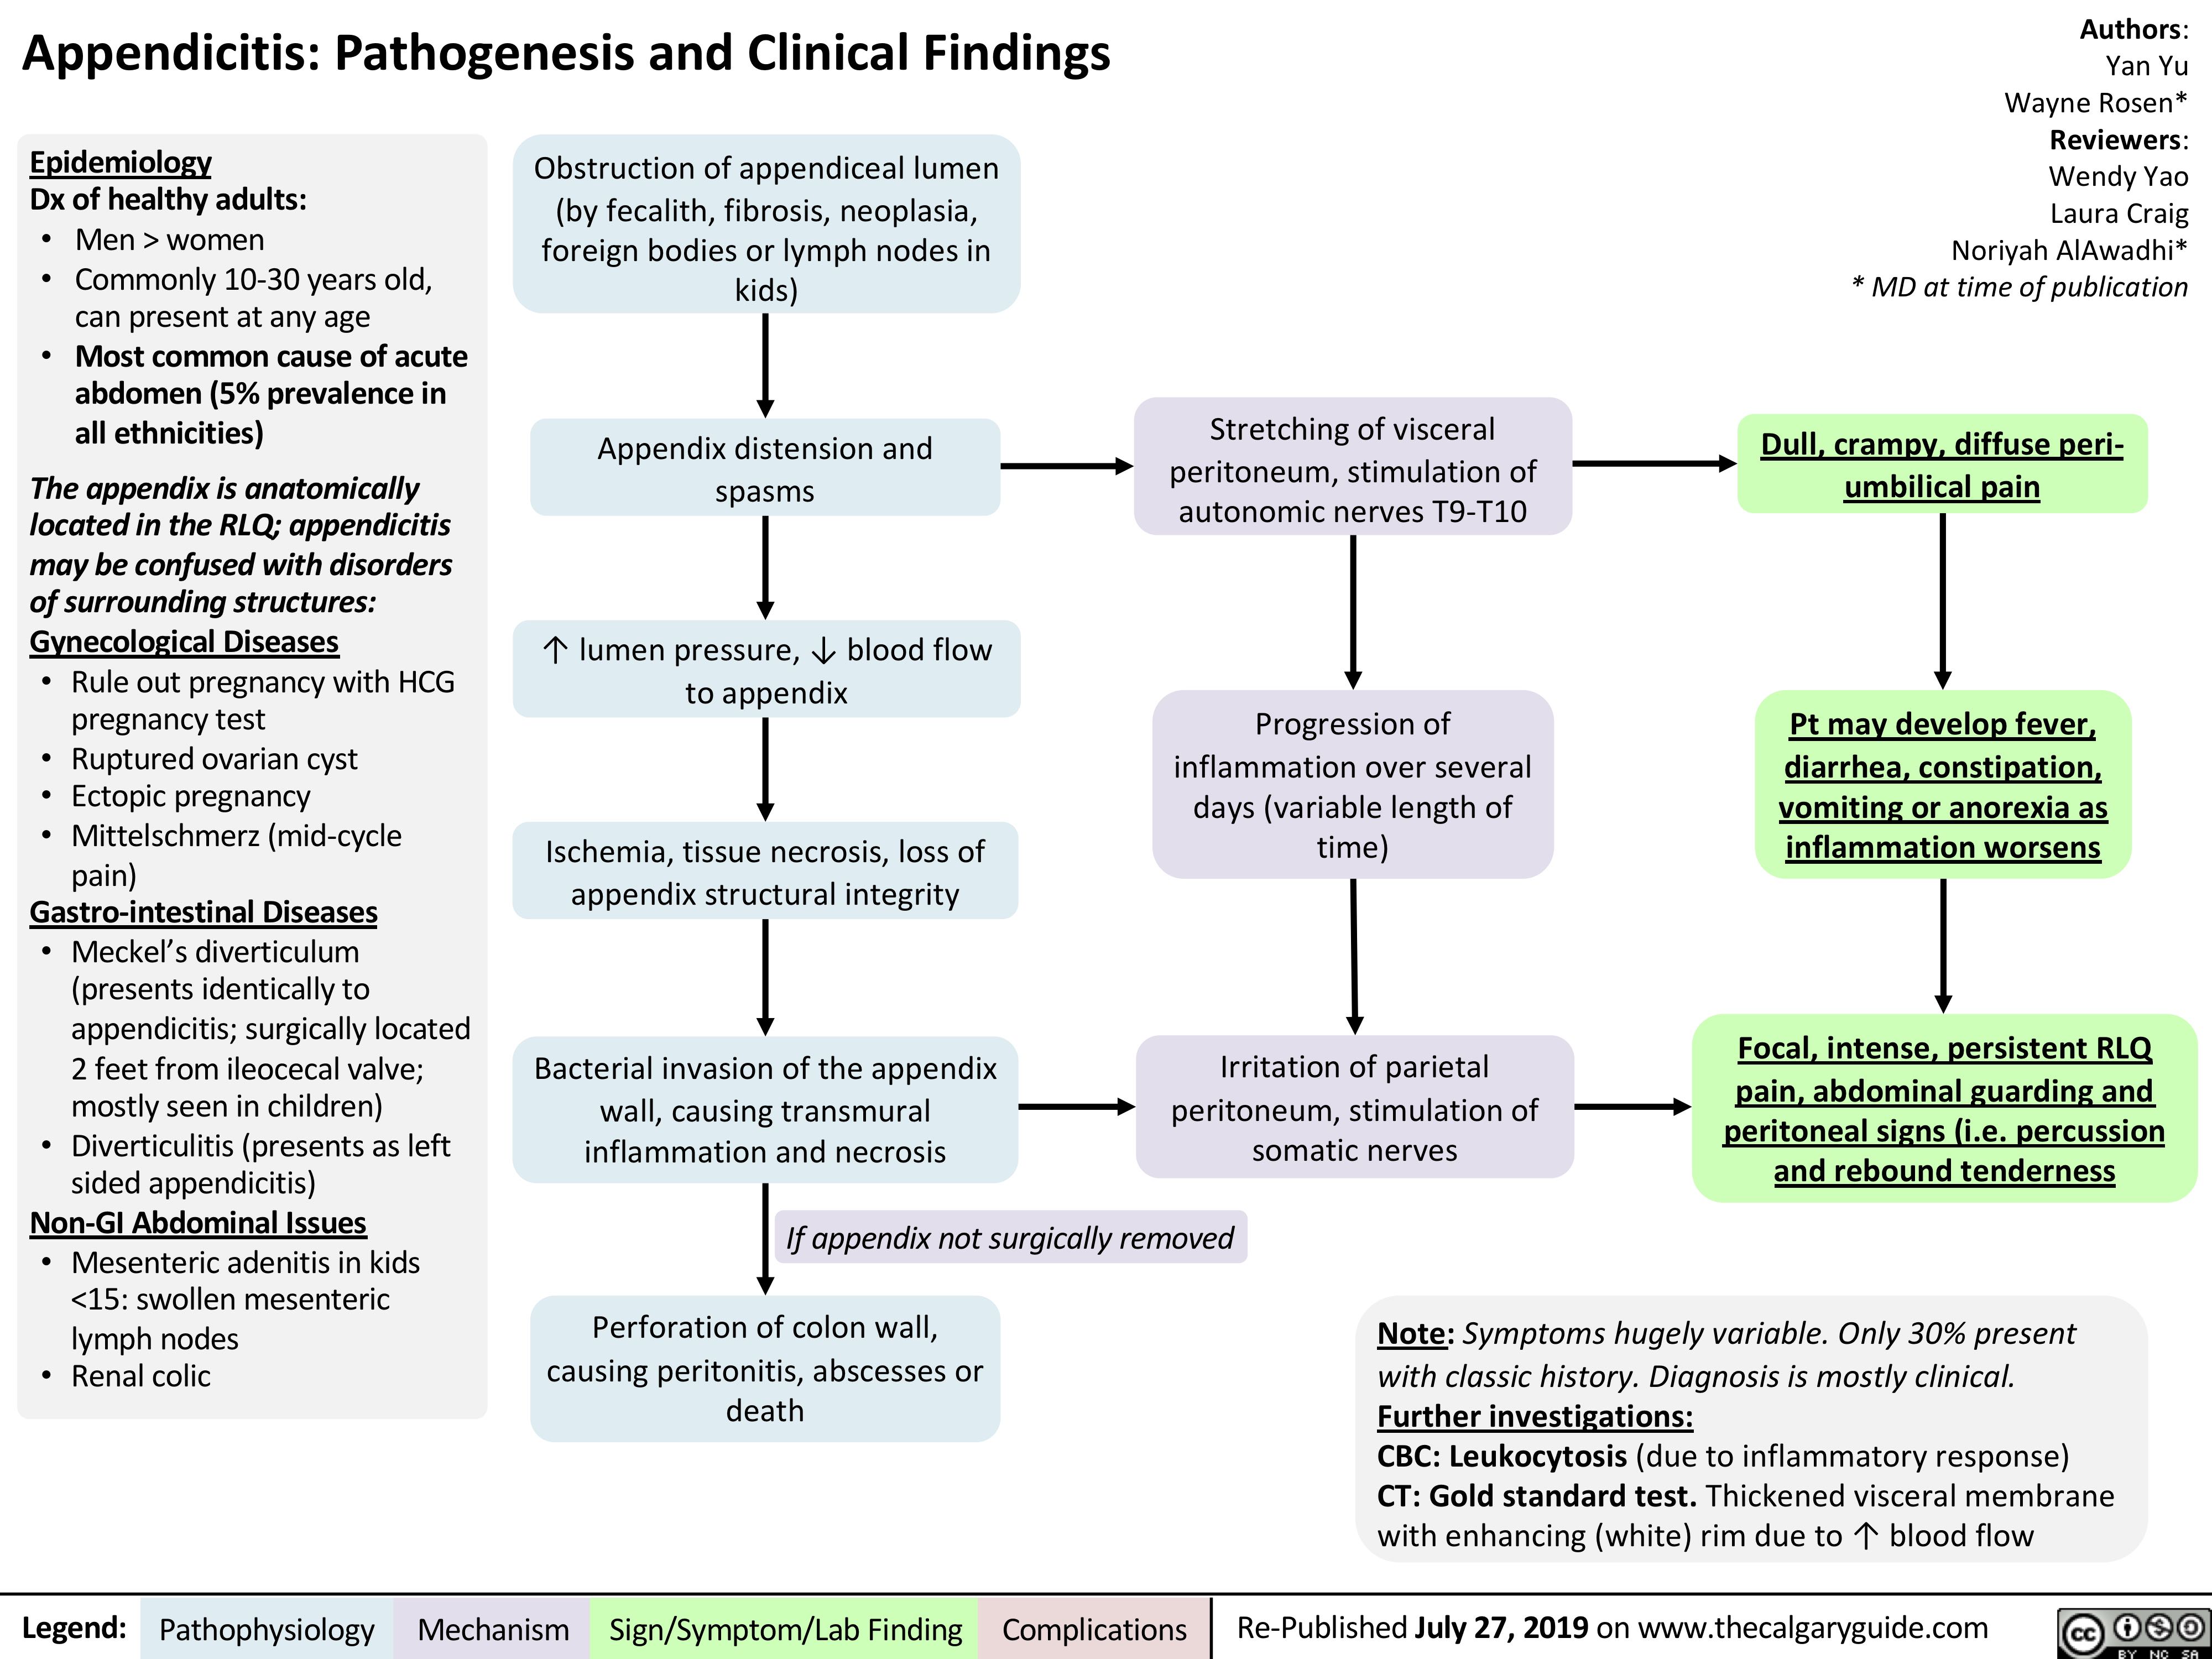 Appendicitis: Pathogenesis and Clinical Findings
Authors: Yan Yu Wayne Rosen* Reviewers: Wendy Yao Laura Craig Noriyah AlAwadhi* * MD at time of publication
Dull, crampy, diffuse peri- umbilical pain
Pt may develop fever, diarrhea, constipation, vomiting or anorexia as inflammation worsens
Focal, intense, persistent RLQ
pain, abdominal guarding and peritoneal signs (i.e. percussion and rebound tenderness
  Epidemiology
Dx of healthy adults:
• Men > women
• Commonly 10-30 years old,
can present at any age
• Most common cause of acute abdomen (5% prevalence in all ethnicities)
The appendix is anatomically located in the RLQ; appendicitis may be confused with disorders of surrounding structures: Gynecological Diseases
• RuleoutpregnancywithHCG pregnancy test
• Rupturedovariancyst
• Ectopicpregnancy
• Mittelschmerz(mid-cycle
pain)
Gastro-intestinal Diseases
• Meckel’sdiverticulum (presents identically to appendicitis; surgically located 2 feet from ileocecal valve; mostly seen in children)
• Diverticulitis(presentsasleft sided appendicitis)
Non-GI Abdominal Issues
• Mesentericadenitisinkids <15: swollen mesenteric lymph nodes
• Renalcolic
Obstruction of appendiceal lumen (by fecalith, fibrosis, neoplasia, foreign bodies or lymph nodes in kids)
Appendix distension and spasms
↑ lumen pressure, ↓ blood flow to appendix
Ischemia, tissue necrosis, loss of appendix structural integrity
Bacterial invasion of the appendix wall, causing transmural inflammationandnecrosis
Stretching of visceral peritoneum, stimulation of autonomic nerves T9-T10
Progression of inflammation over several days (variable length of time)
Irritation of parietal peritoneum, stimulation of somaticnerves
                              If appendix not surgically removed
Perforation of colon wall, causing peritonitis, abscesses or death
Note: Symptoms hugely variable. Only 30% present with classic history. Diagnosis is mostly clinical. Further investigations:
CBC: Leukocytosis (due to inflammatory response) CT: Gold standard test. Thickened visceral membrane with enhancing (white) rim due to ↑ blood flow
      Legend:
 Pathophysiology
 Mechanism
Sign/Symptom/Lab Finding
  Complications
Re-Published July 27, 2019 on www.thecalgaryguide.com
   